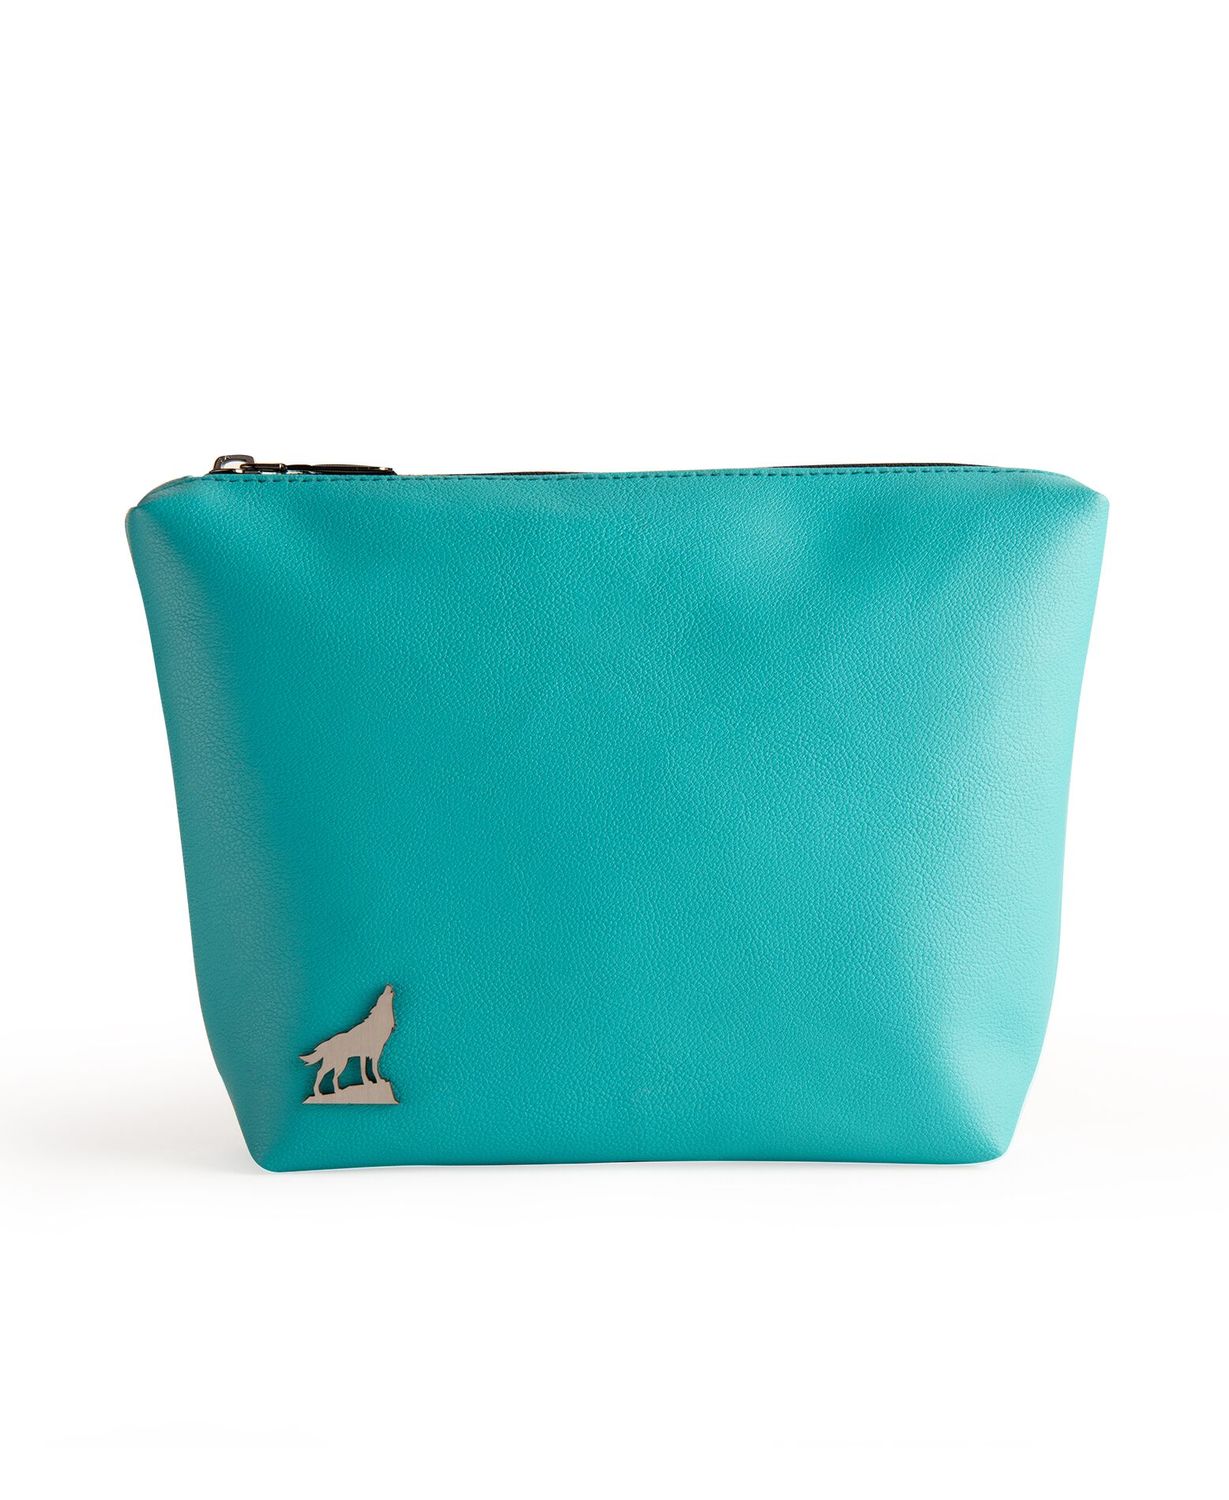 Buy mCaffeine Naked Teal Pouch worth Rs 499 - Purplle